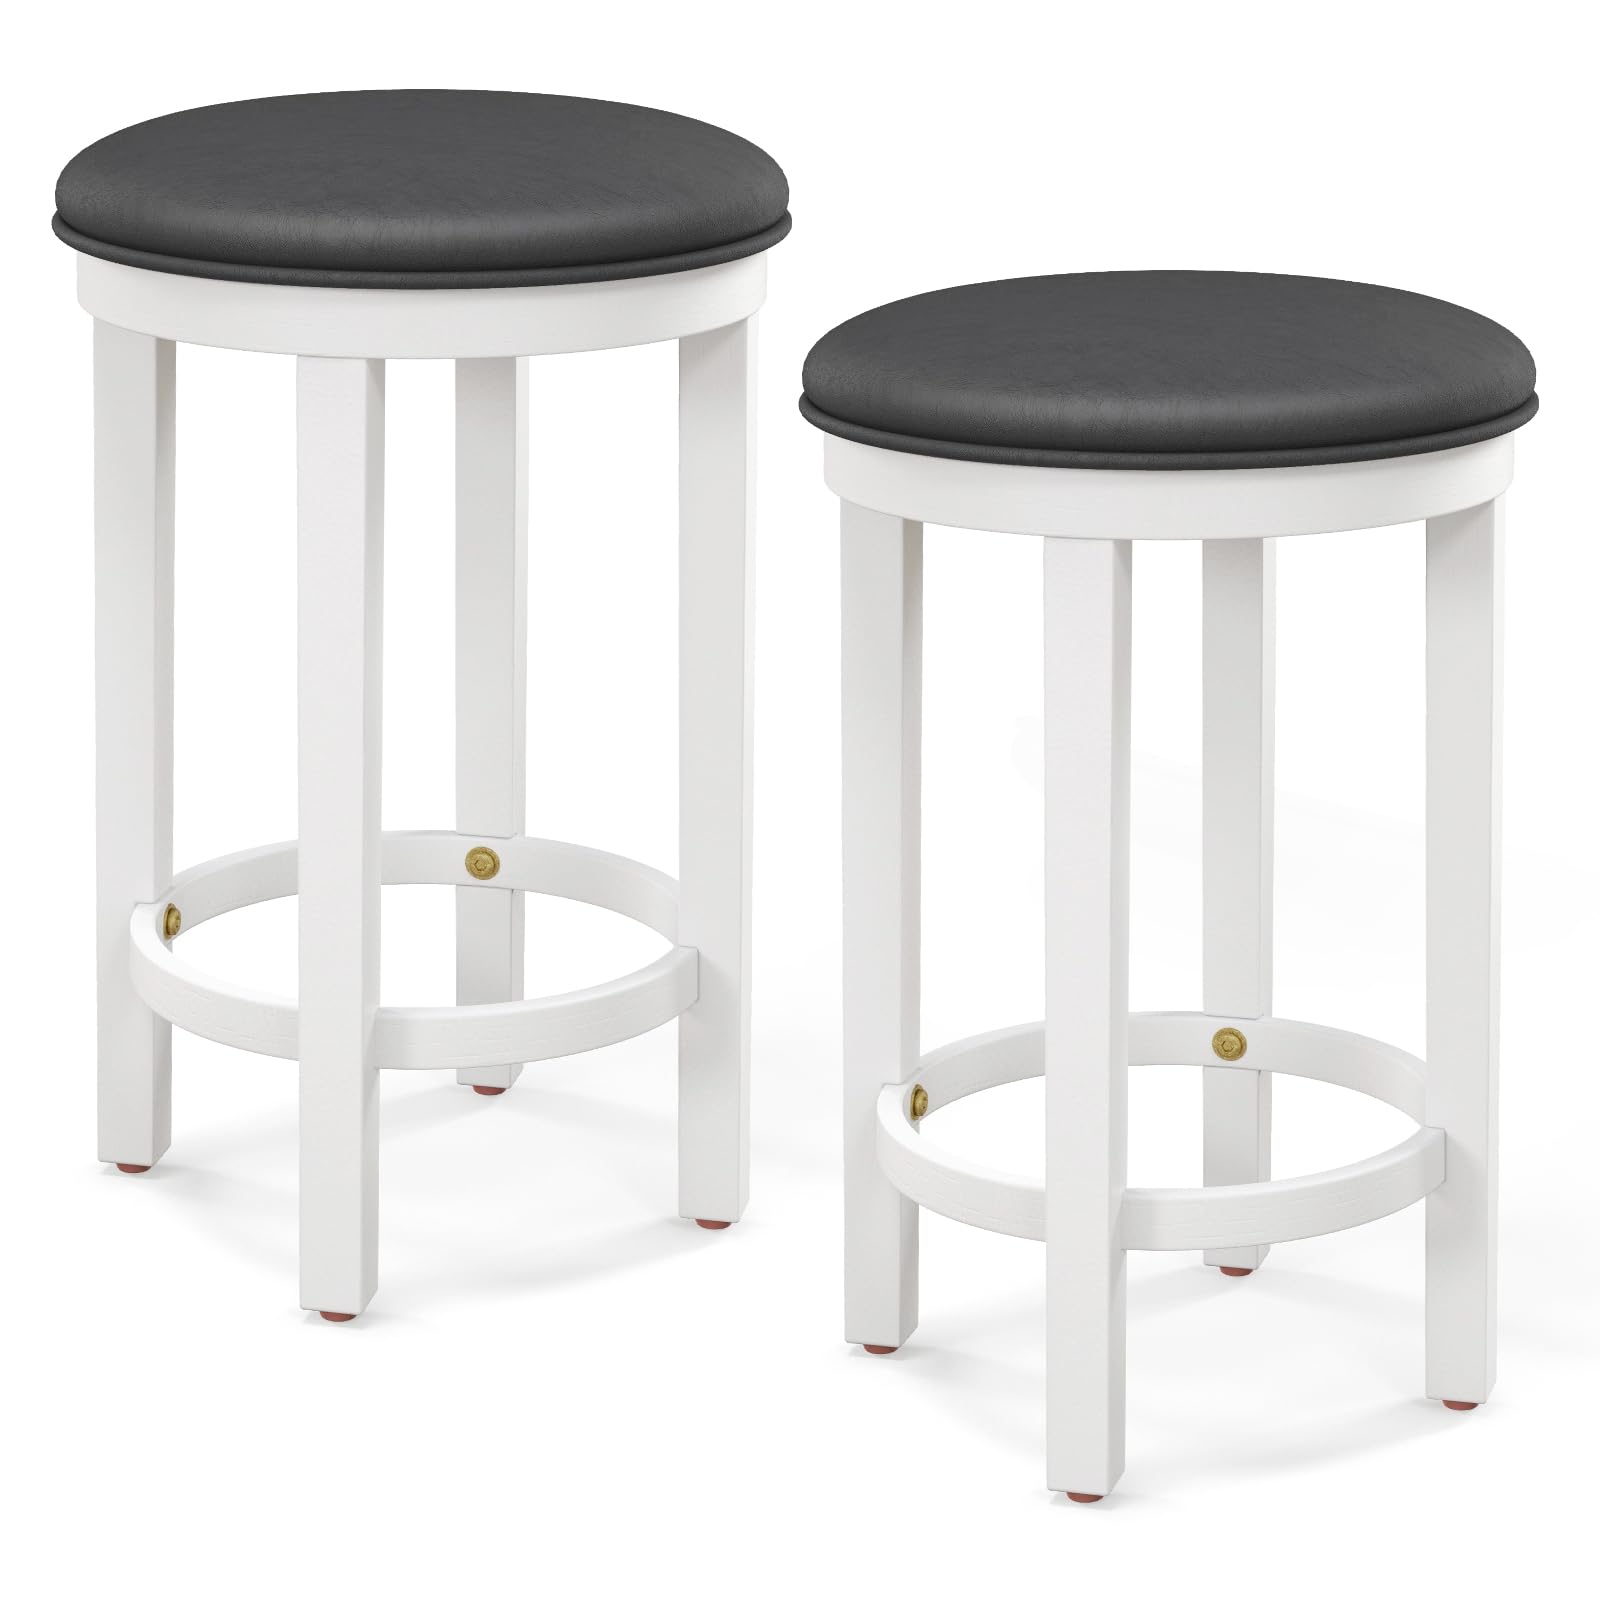 Giantex Bar Stools Set, 25-Inch Counter Height Stools with Round Seat, Footrest, Wooden Frame